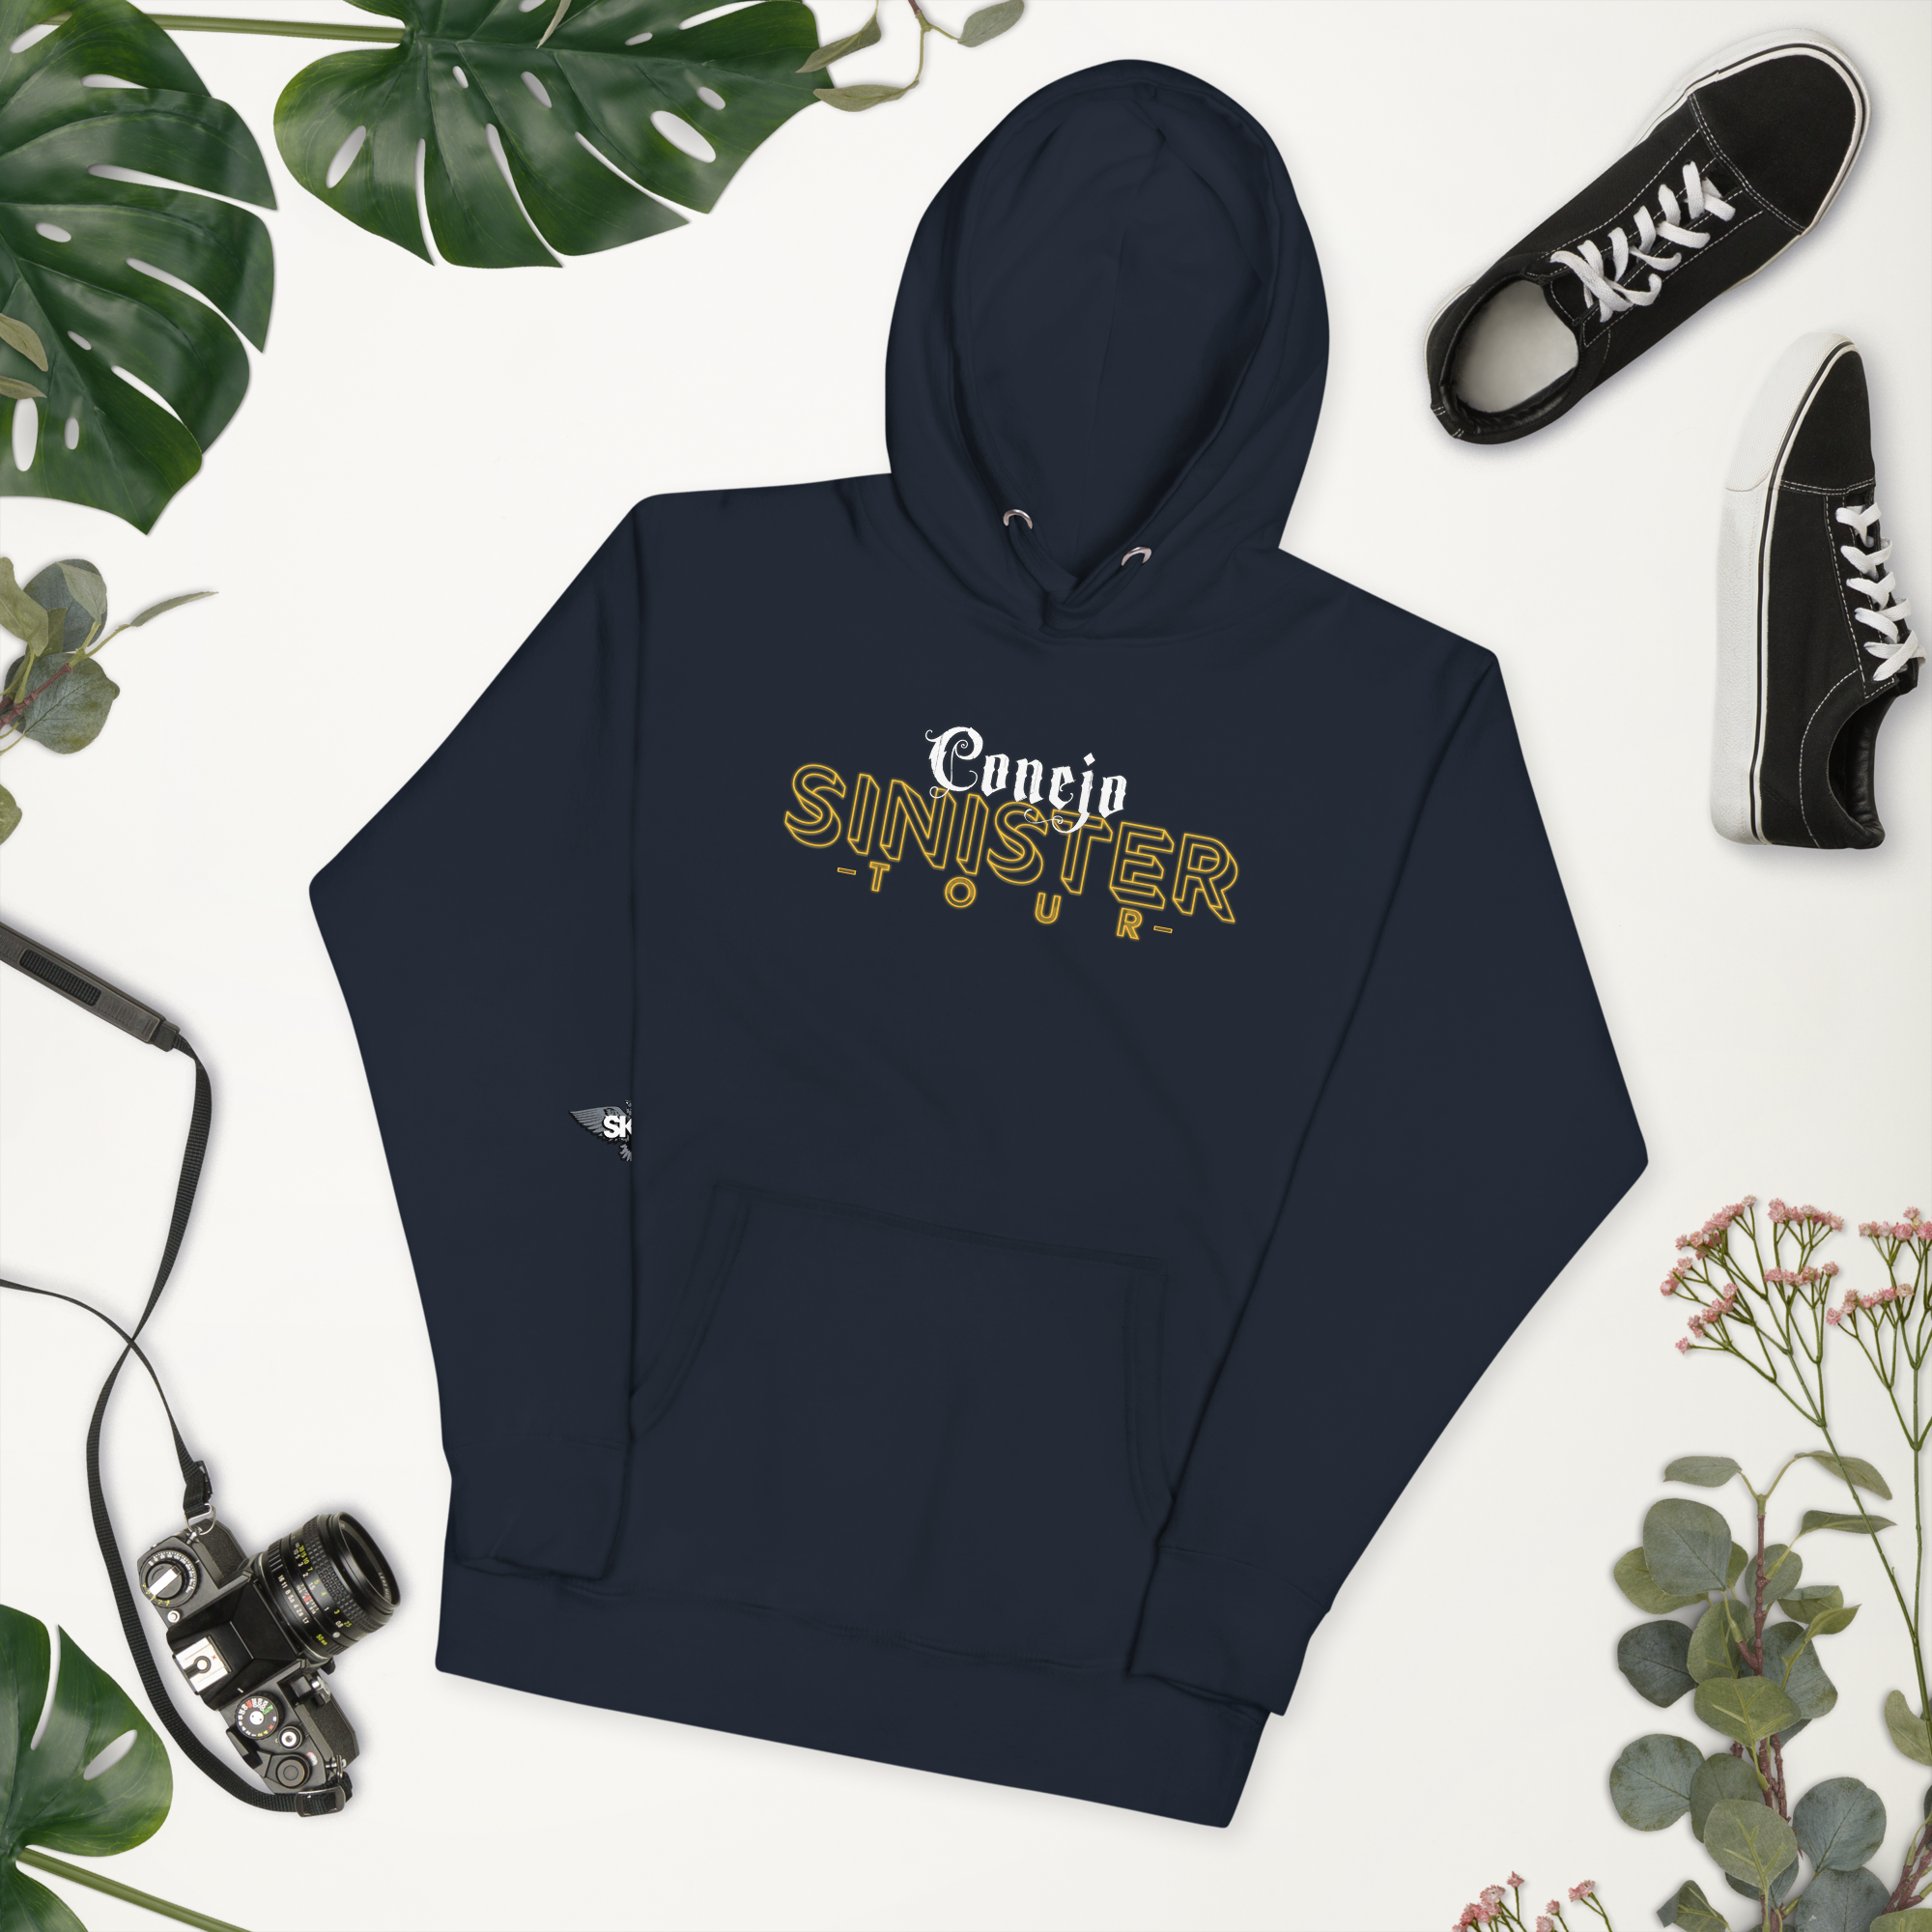 Conejo's Sinister Tour Hoodie